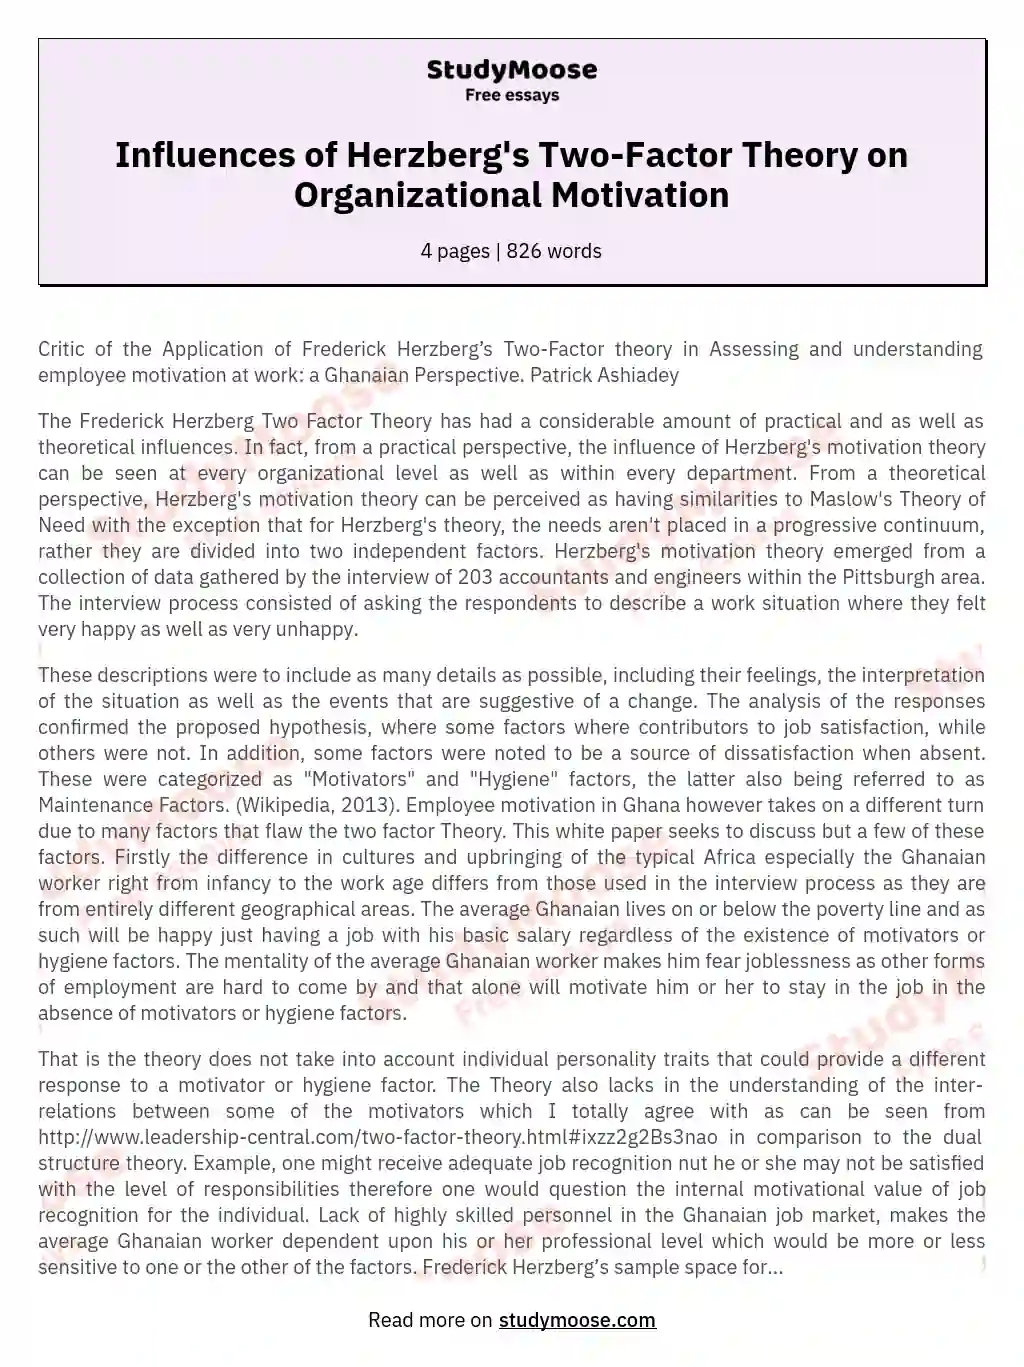 Influences of Herzberg's Two-Factor Theory on Organizational Motivation